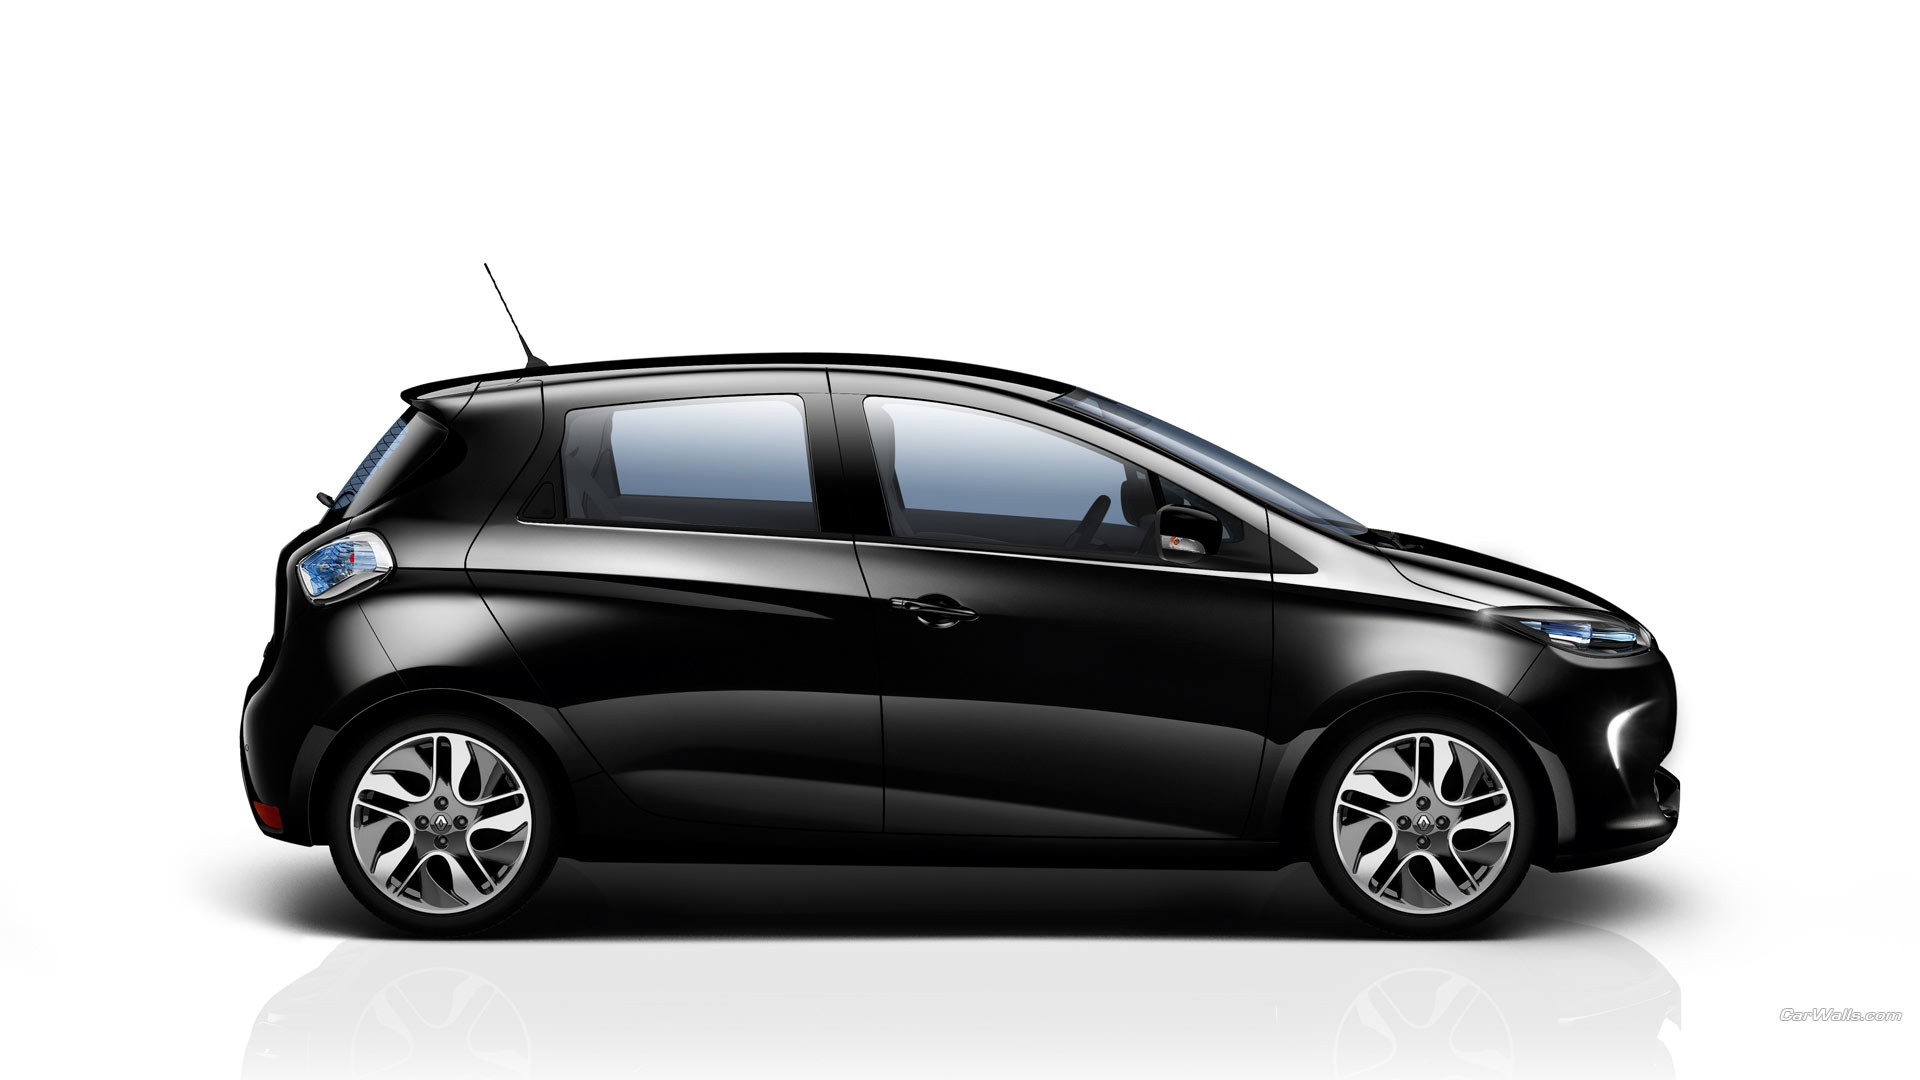 General 1920x1080 car Renault ZOE Renault white background vehicle black cars French Cars hatchbacks electric car